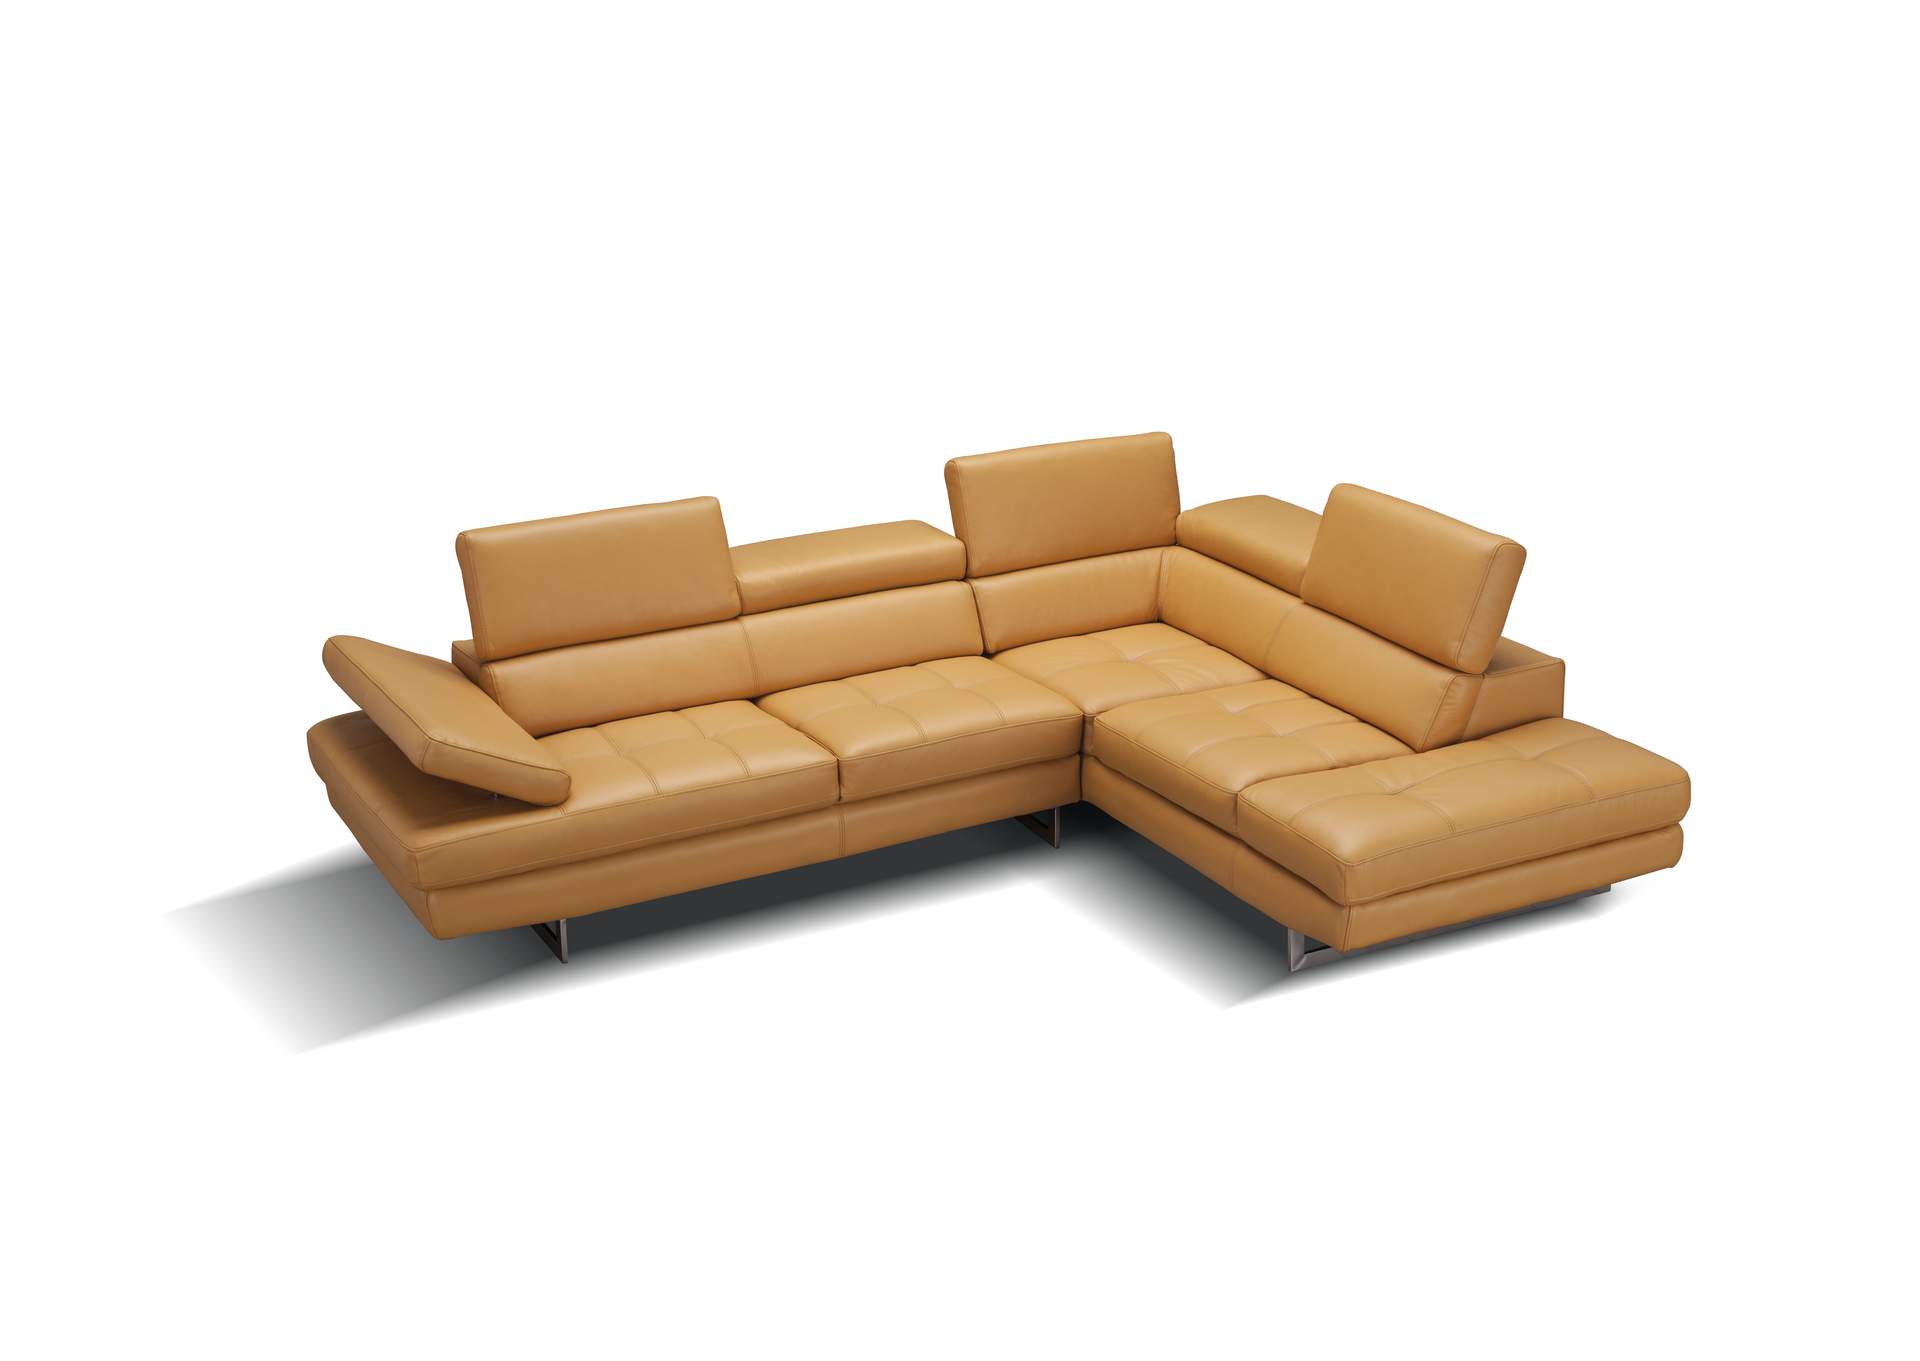 A761 Italian Leather Sectional Freesia In Right Hand Facing,J&M Furniture